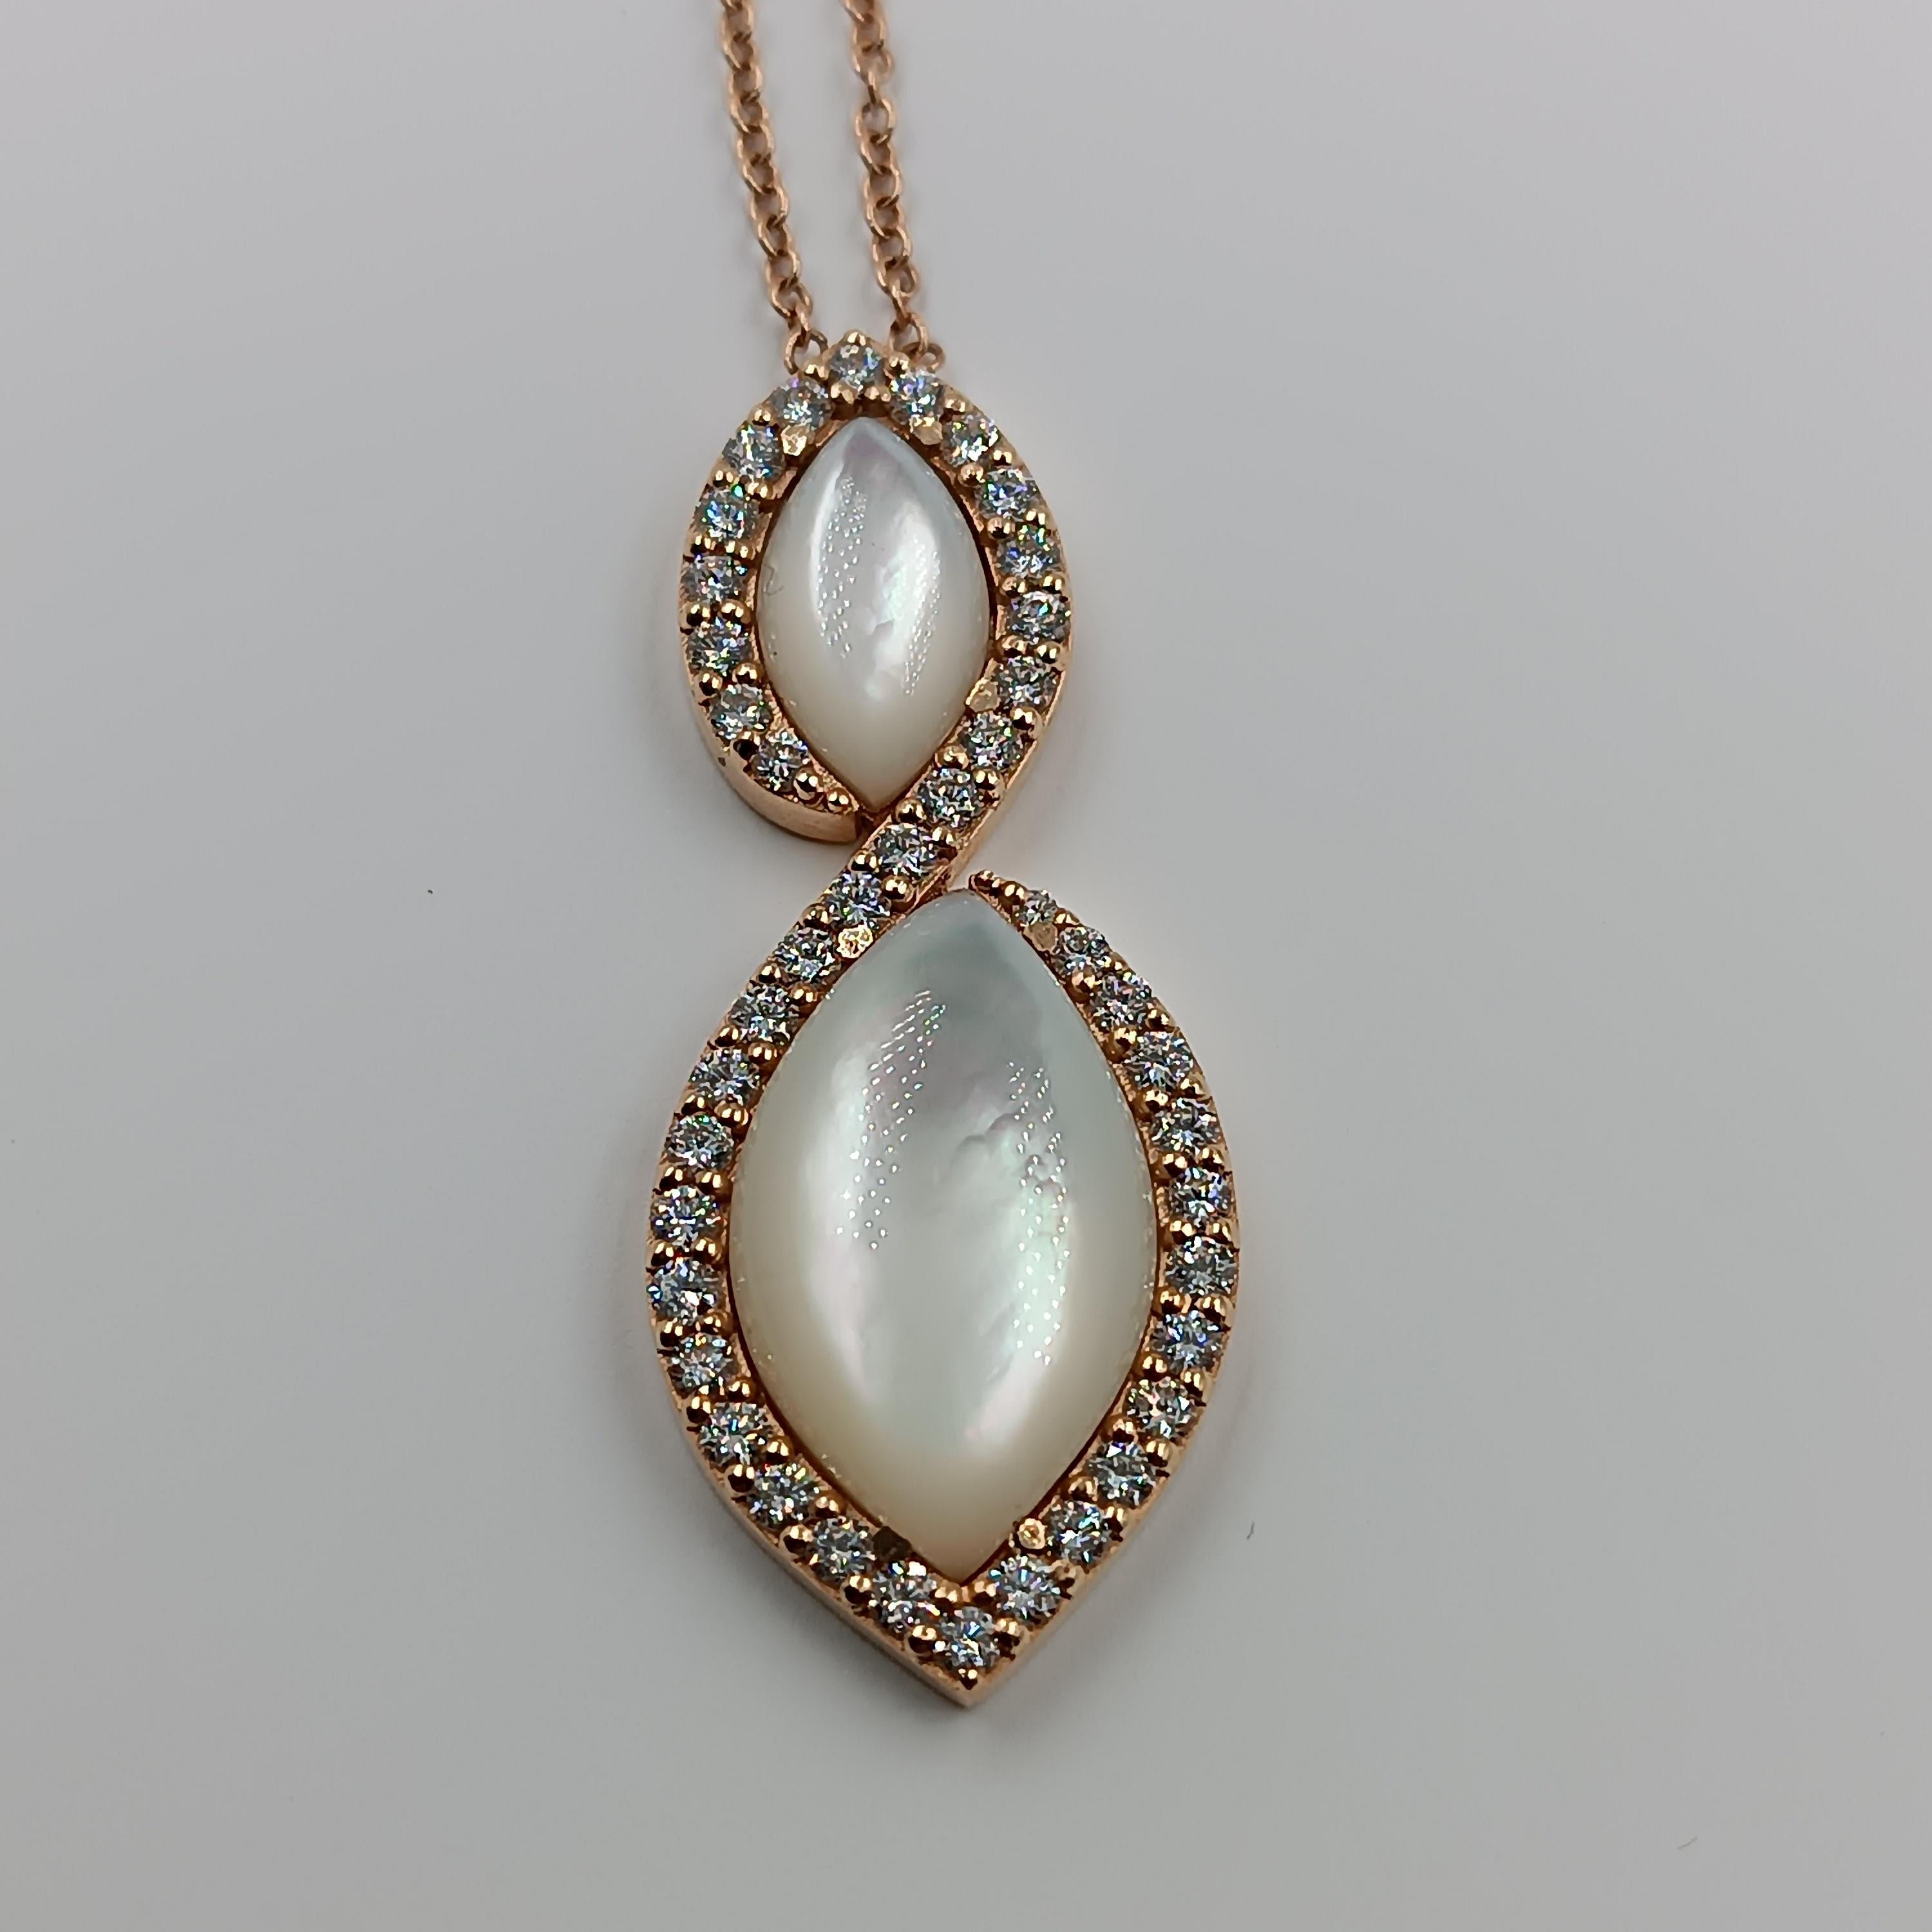 Contemporary 1.23 Carat Vs G Diamonds on 18 Carat Rose Gold with Mother of Pearl Pendant For Sale